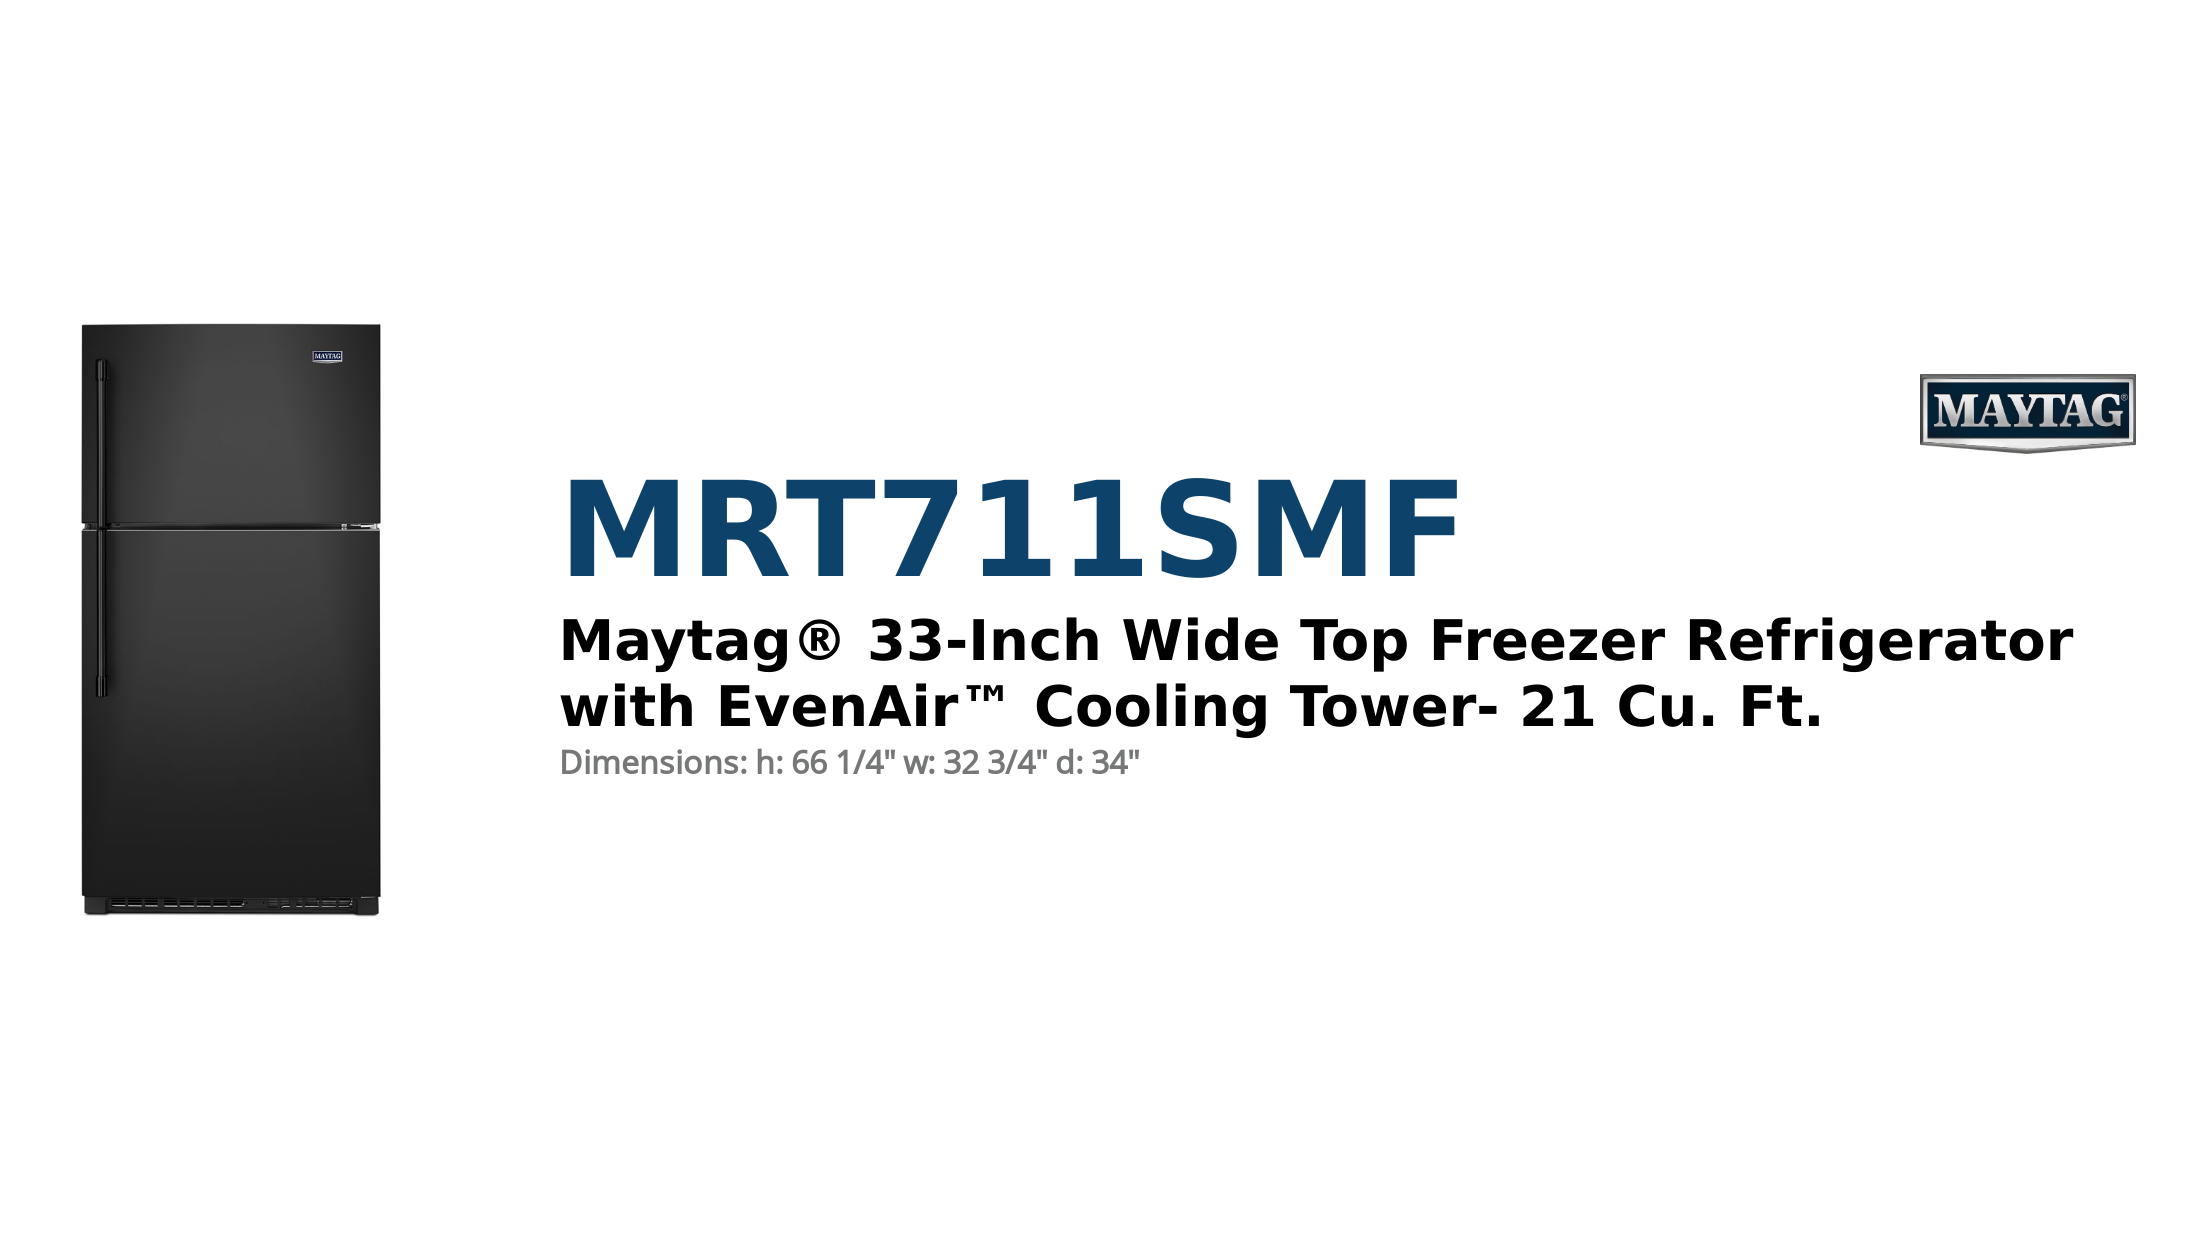 Maytag® 33-Inch Wide Top Freezer Refrigerator with EvenAir™ Cooling Tower- 21 Cu. Ft.